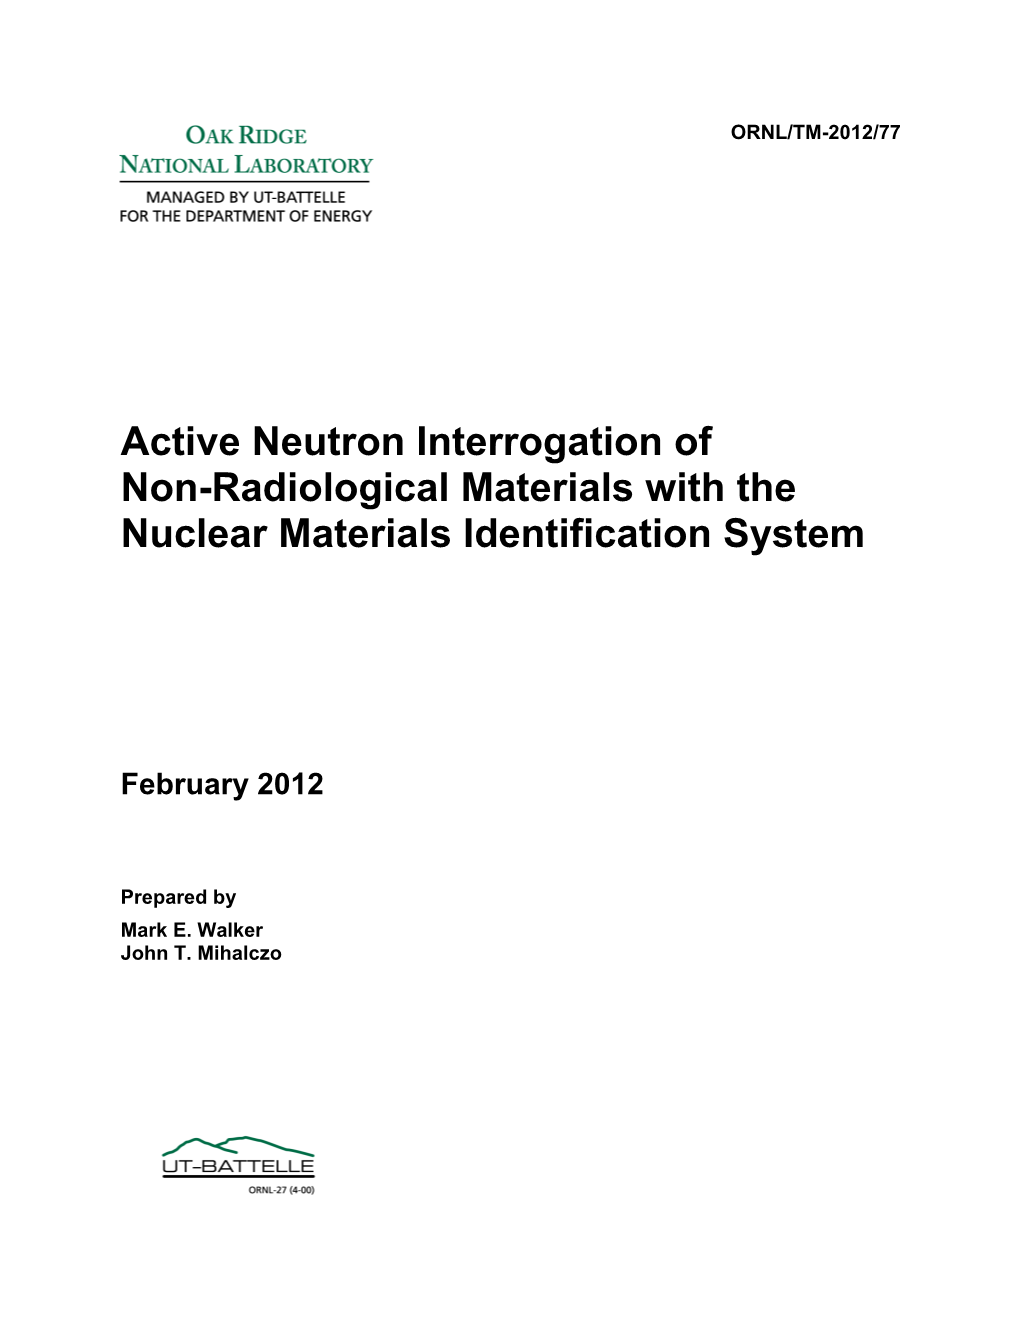 Active Neutron Interrogation of Non-Radiological Materials with the Nuclear Materials Identification System